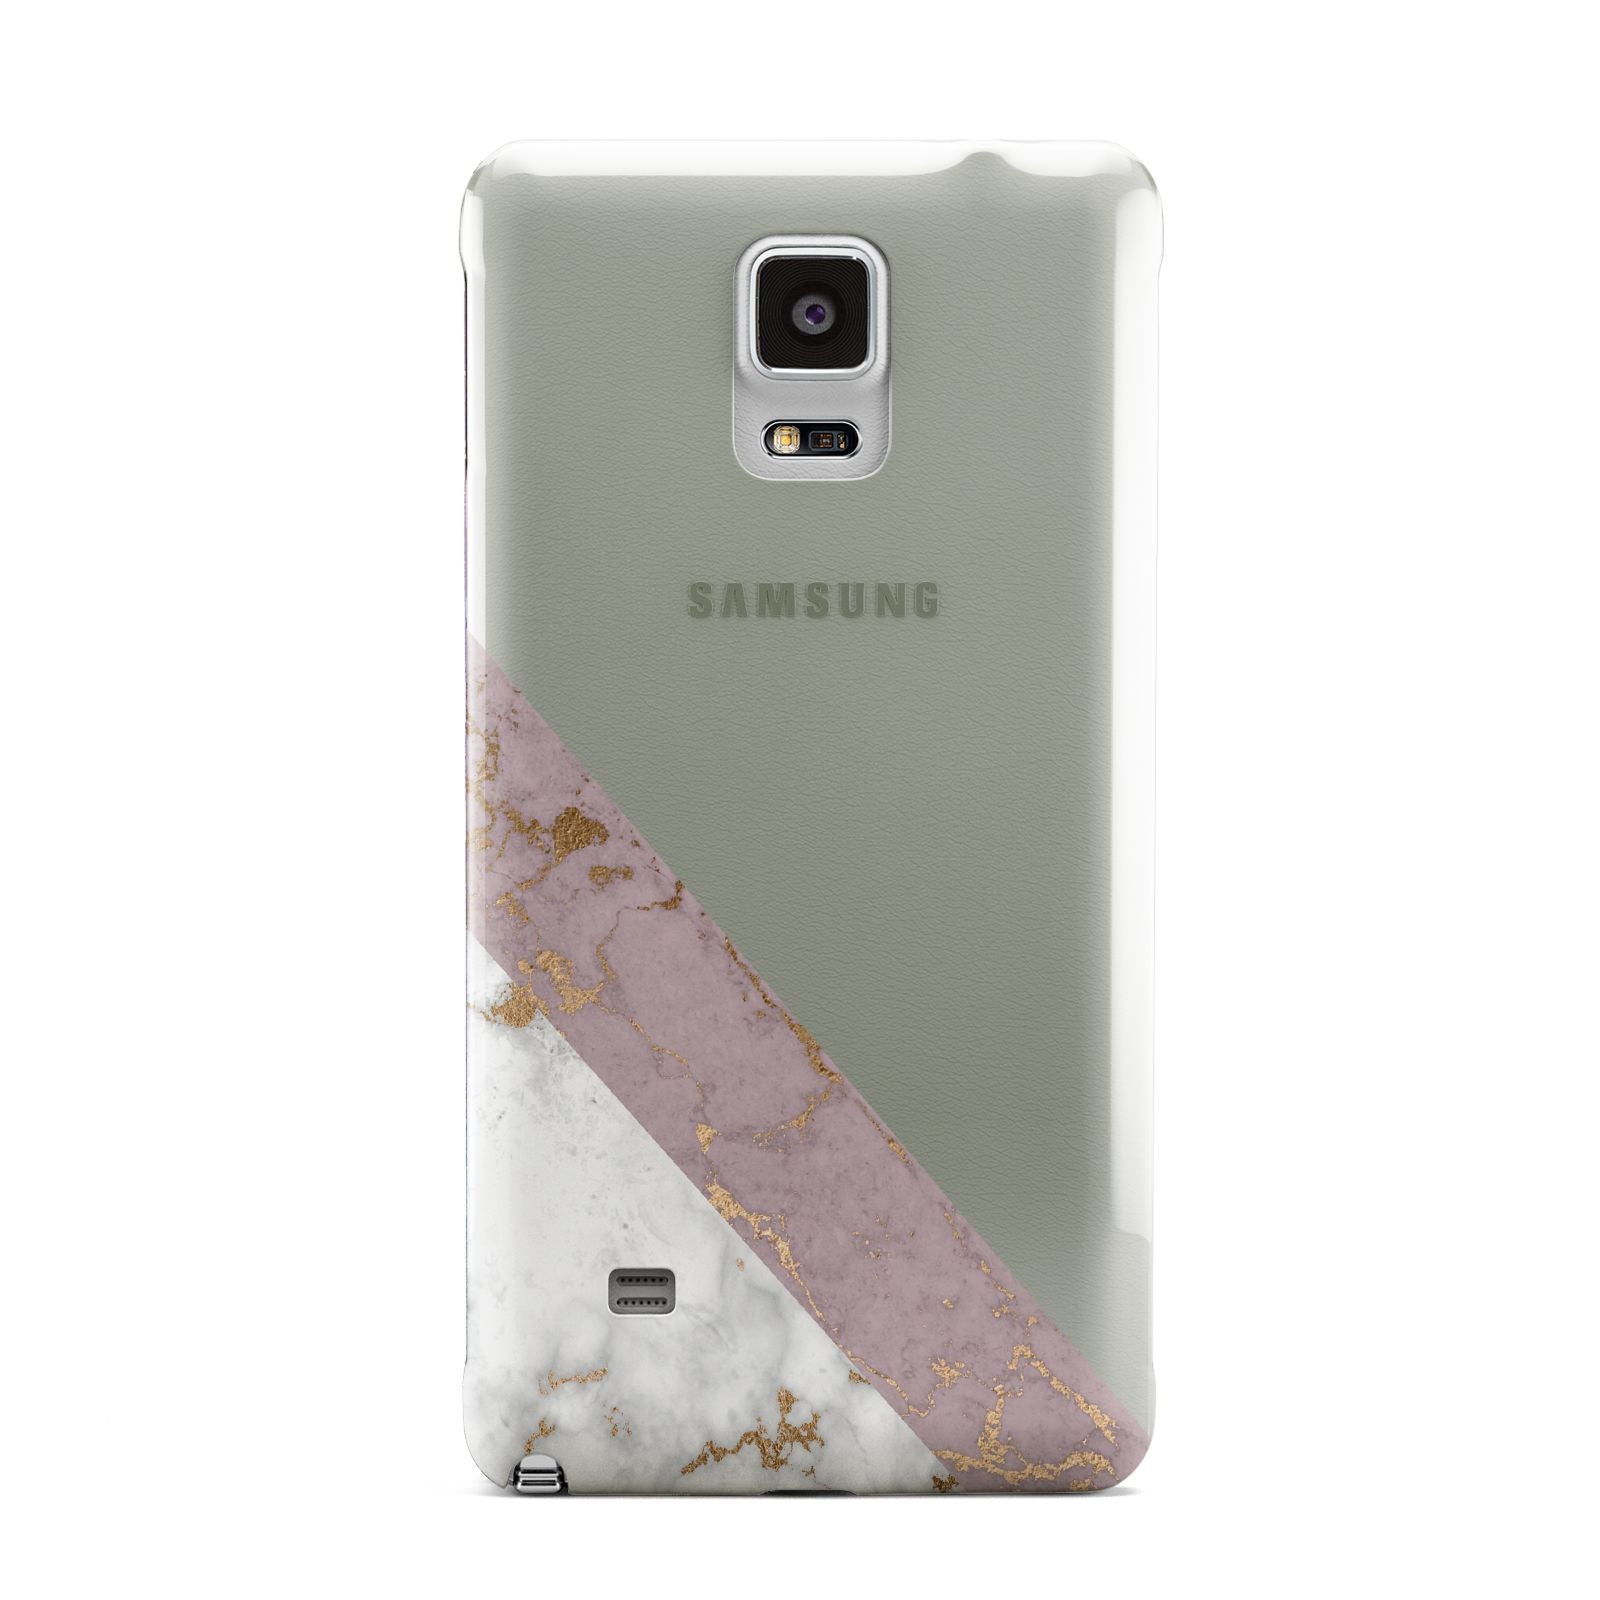 Transparent Pink and White Marble Samsung Galaxy Note 4 Case